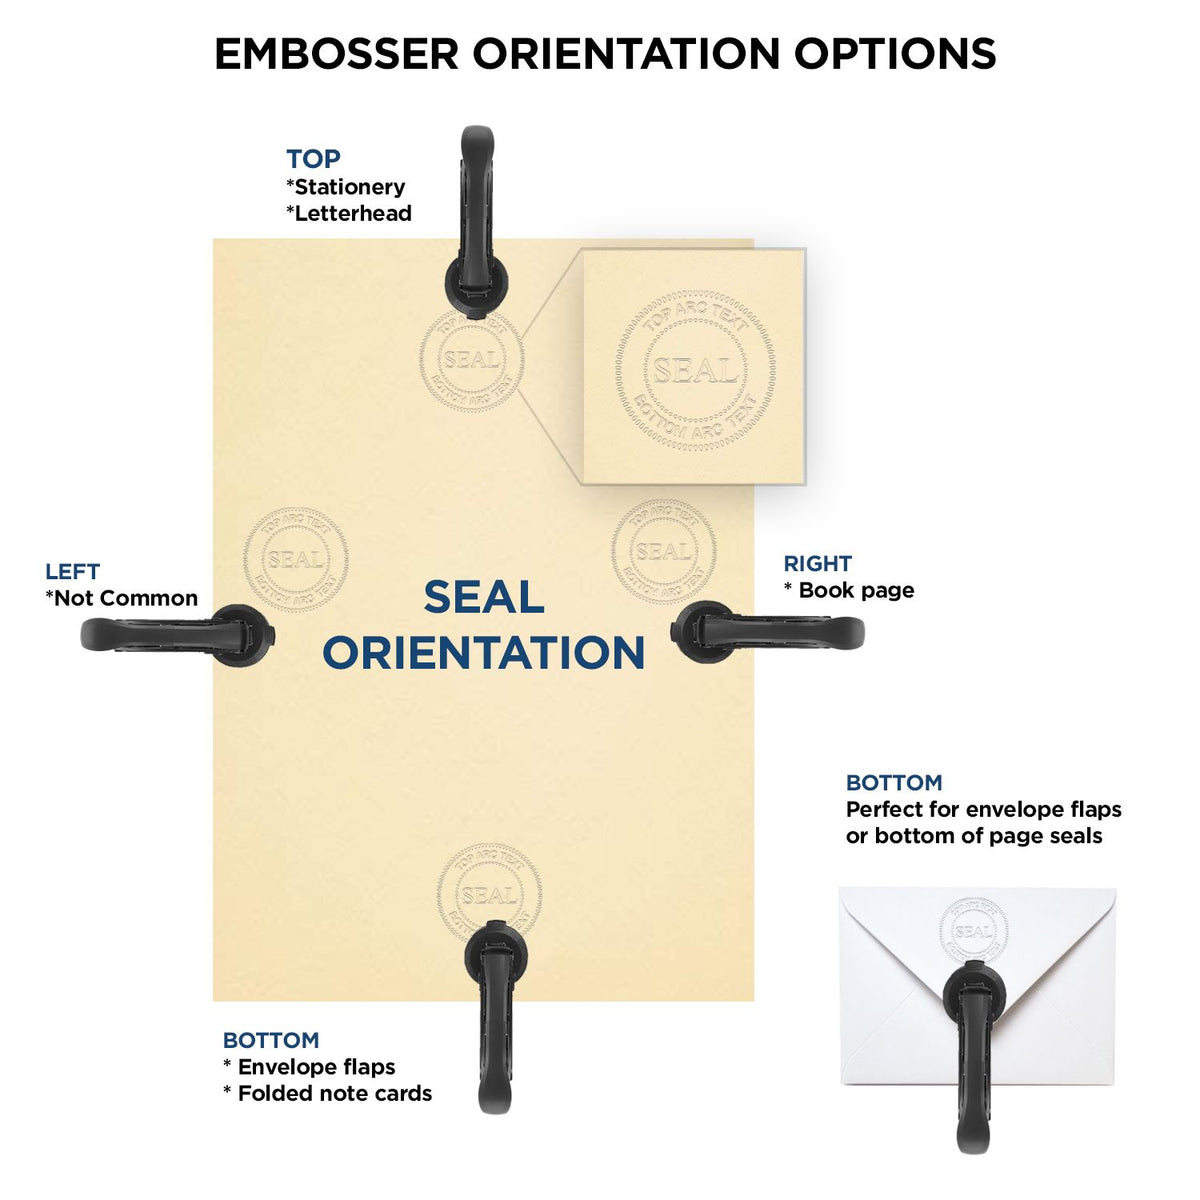 An infographic for the Heavy Duty Cast Iron New Mexico Geologist Seal Embosser showing embosser orientation, this is showing examples of a top, bottom, right and left insert.